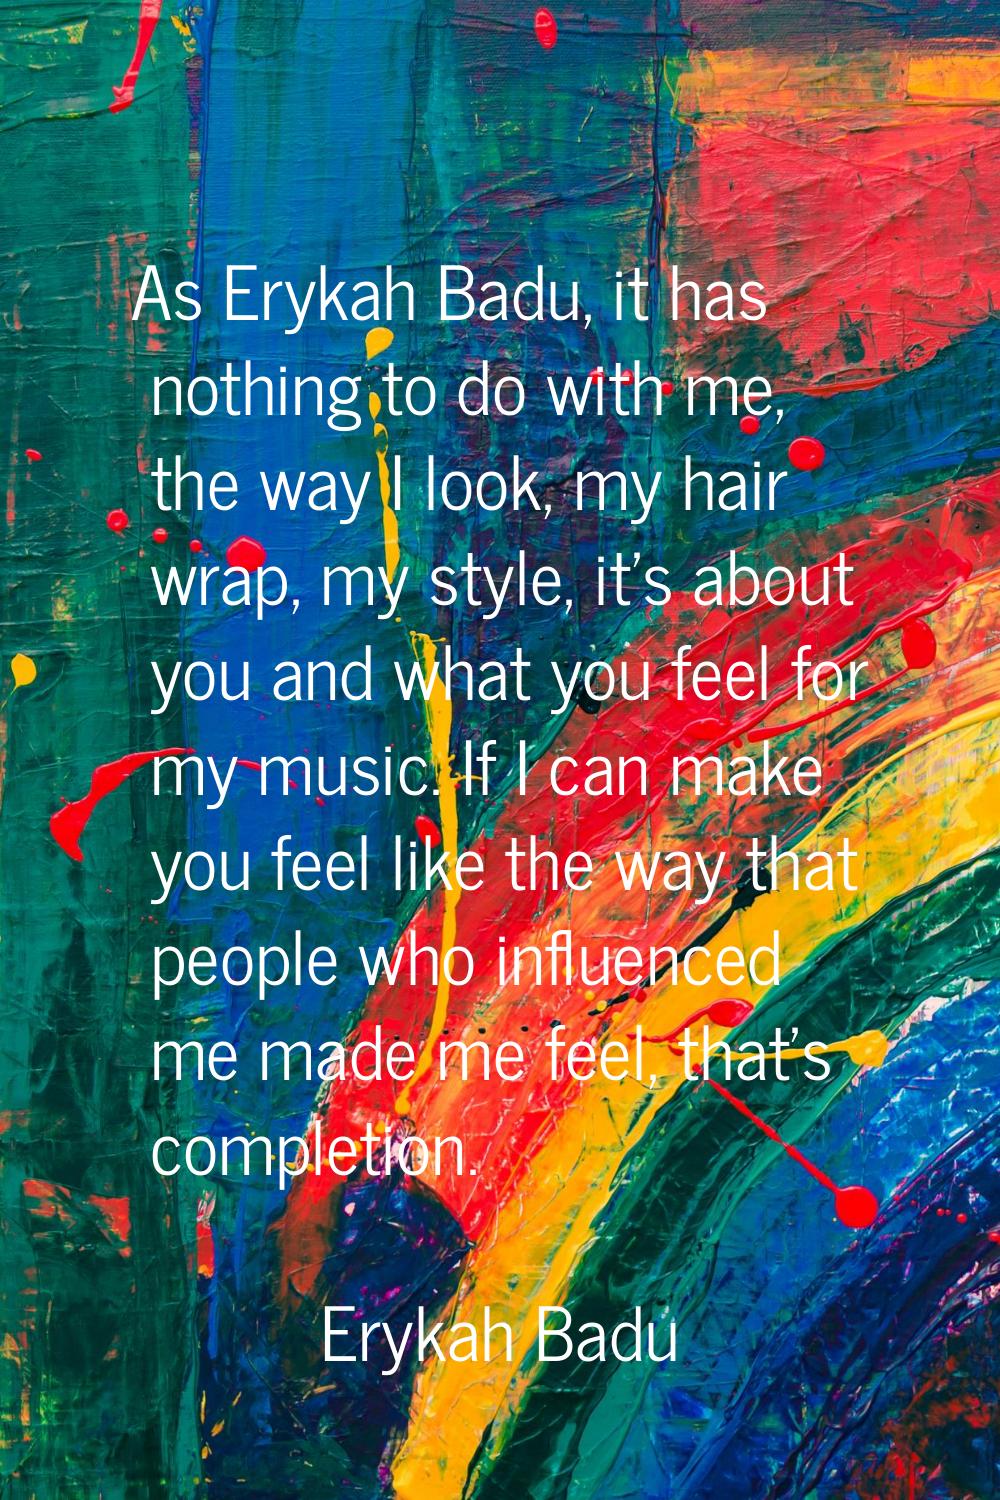 As Erykah Badu, it has nothing to do with me, the way I look, my hair wrap, my style, it's about yo